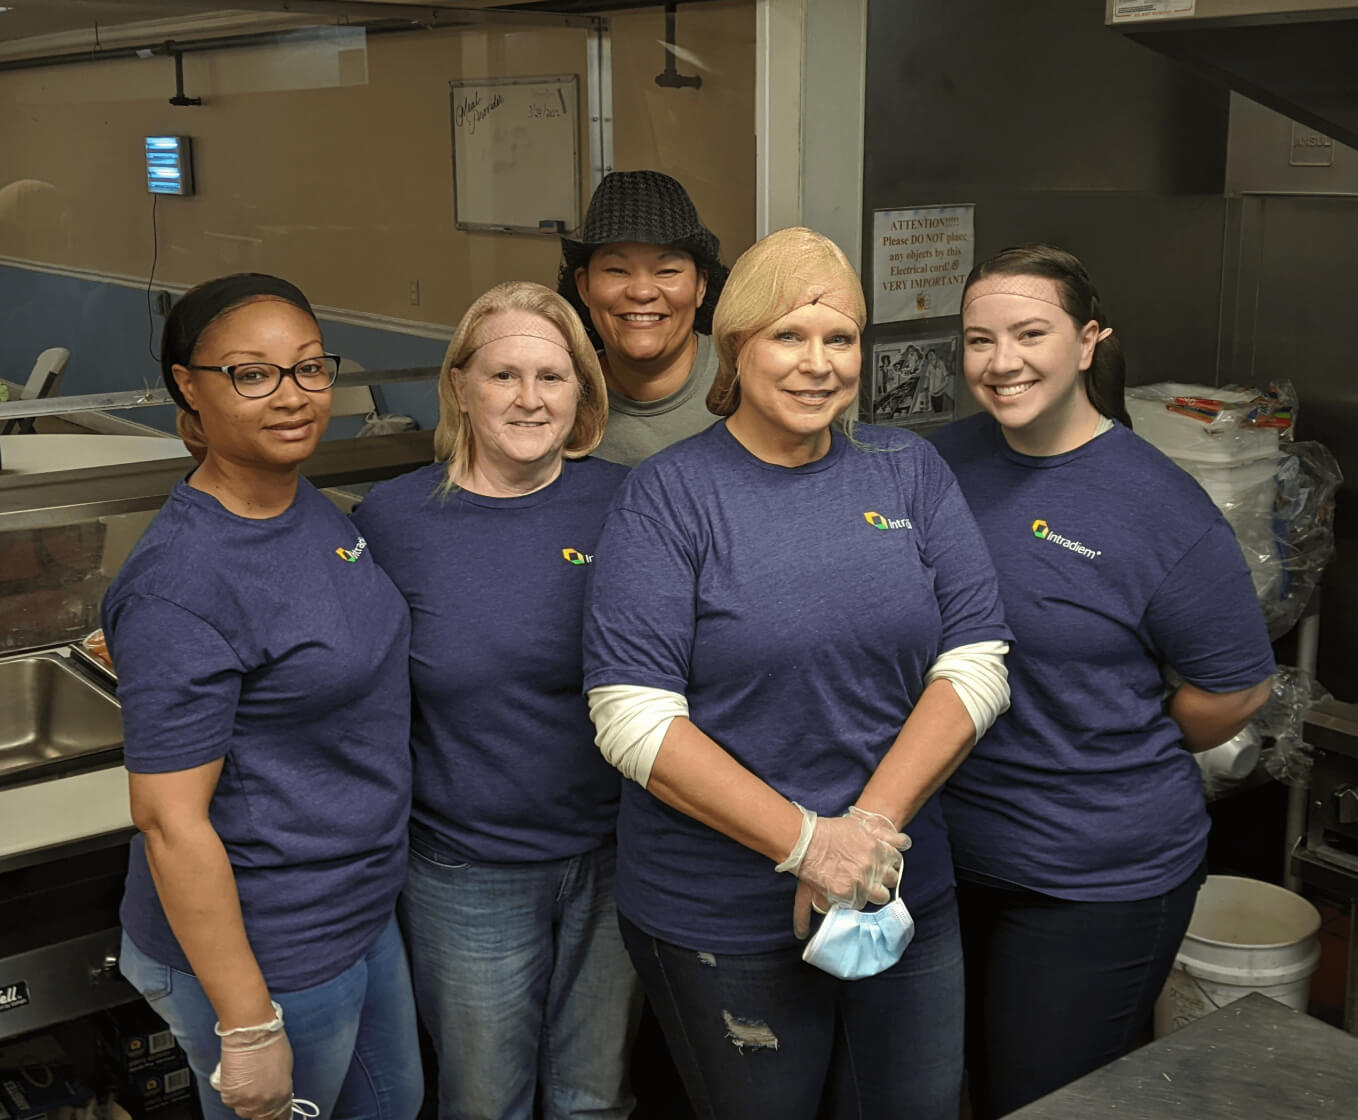 Group of 5 women wearing hair nets working at a nonprofit giving back and volunteering